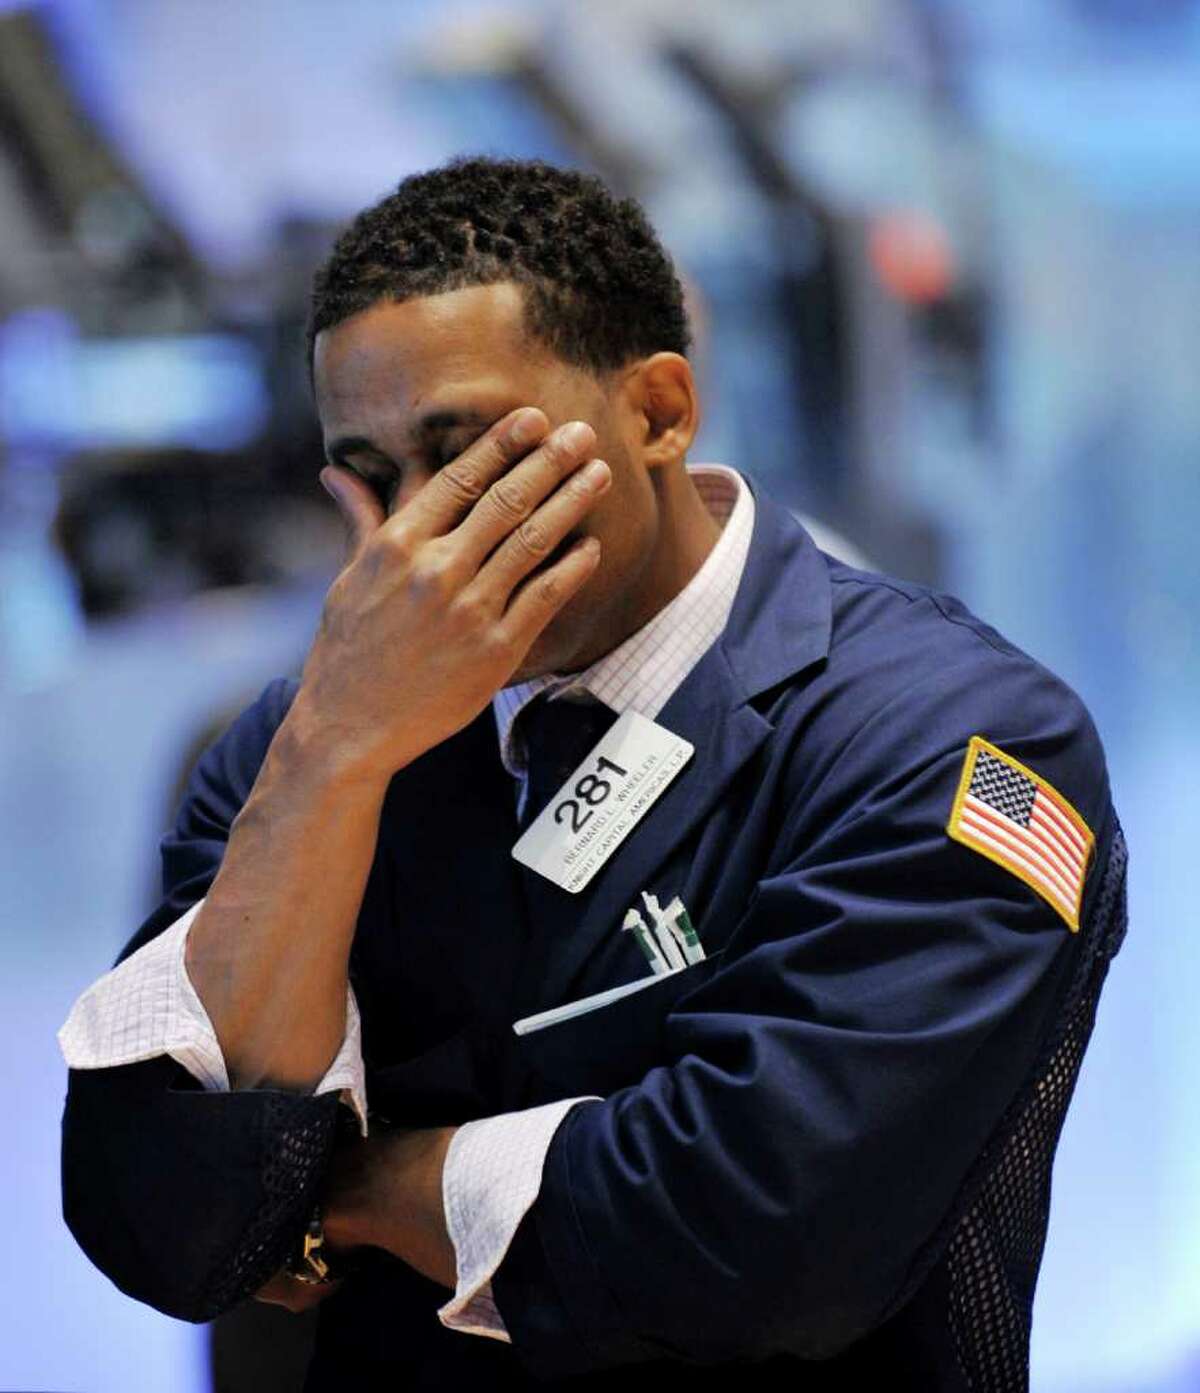 Specialist Bernard L. Wheeler of Knight Captial Americas, L.P. works on the floor of the New York Stock Exchange on August 4, 2011. The Dow Jones Industrial Average plunged 4.3 percent Thursday, its worst one-day drop in more than two years, as global markets melted down over fears of another world economic downturn. The Dow was down 512.76 points to 11,383.68; the broader S&P 500 lost 4.8 percent to 1,200.07, while the tech-heavy Nasdaq Composite plunged 5.1 percent to 2,556.39. AFP PHOTO/Stan HONDA (Photo credit should read STAN HONDA/AFP/Getty Images)